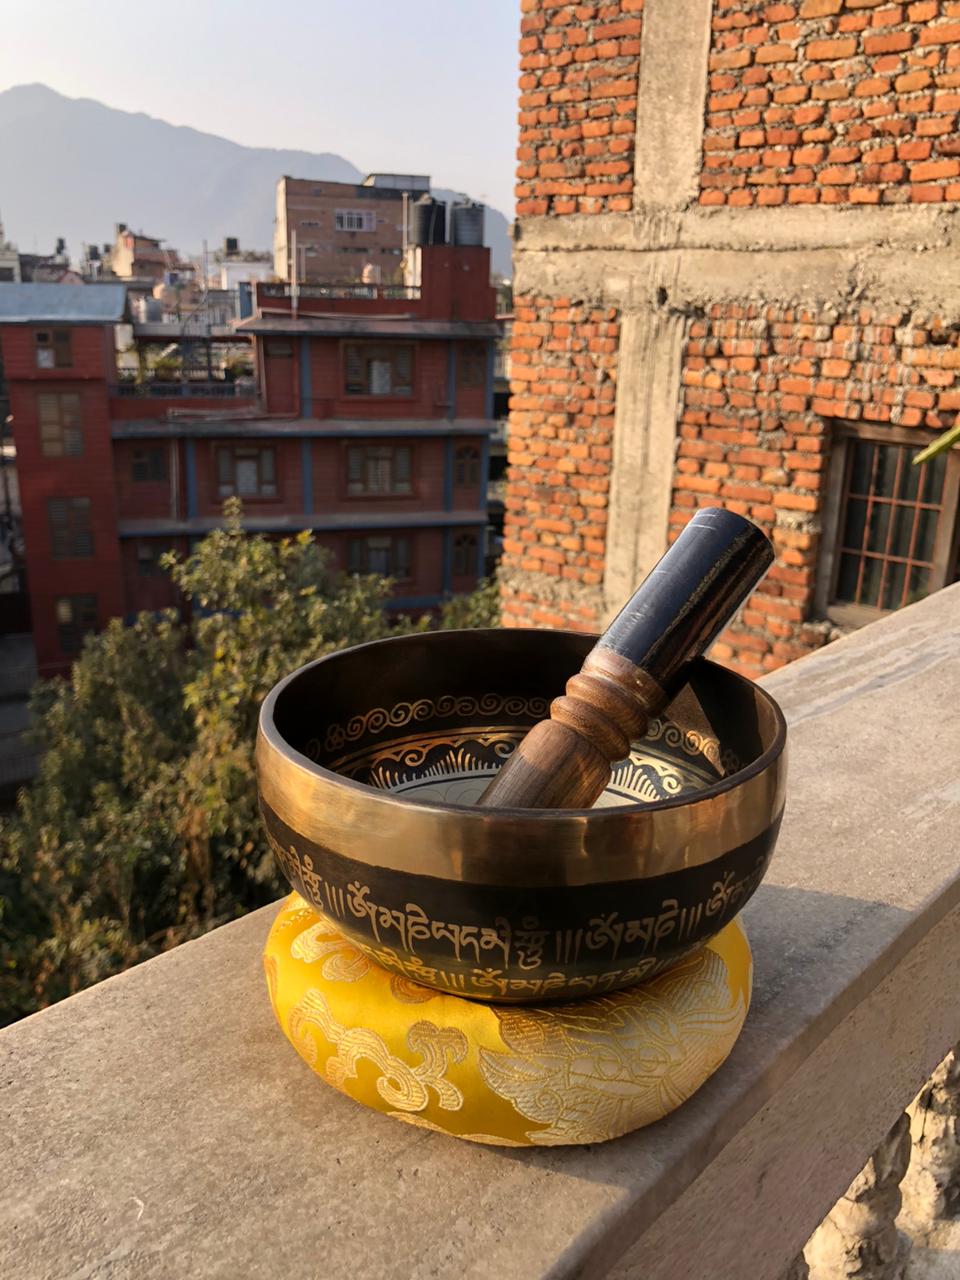 A Guide to the Cultural and Historical Attractions of Kathmandu, Bhaktapur, and Patan